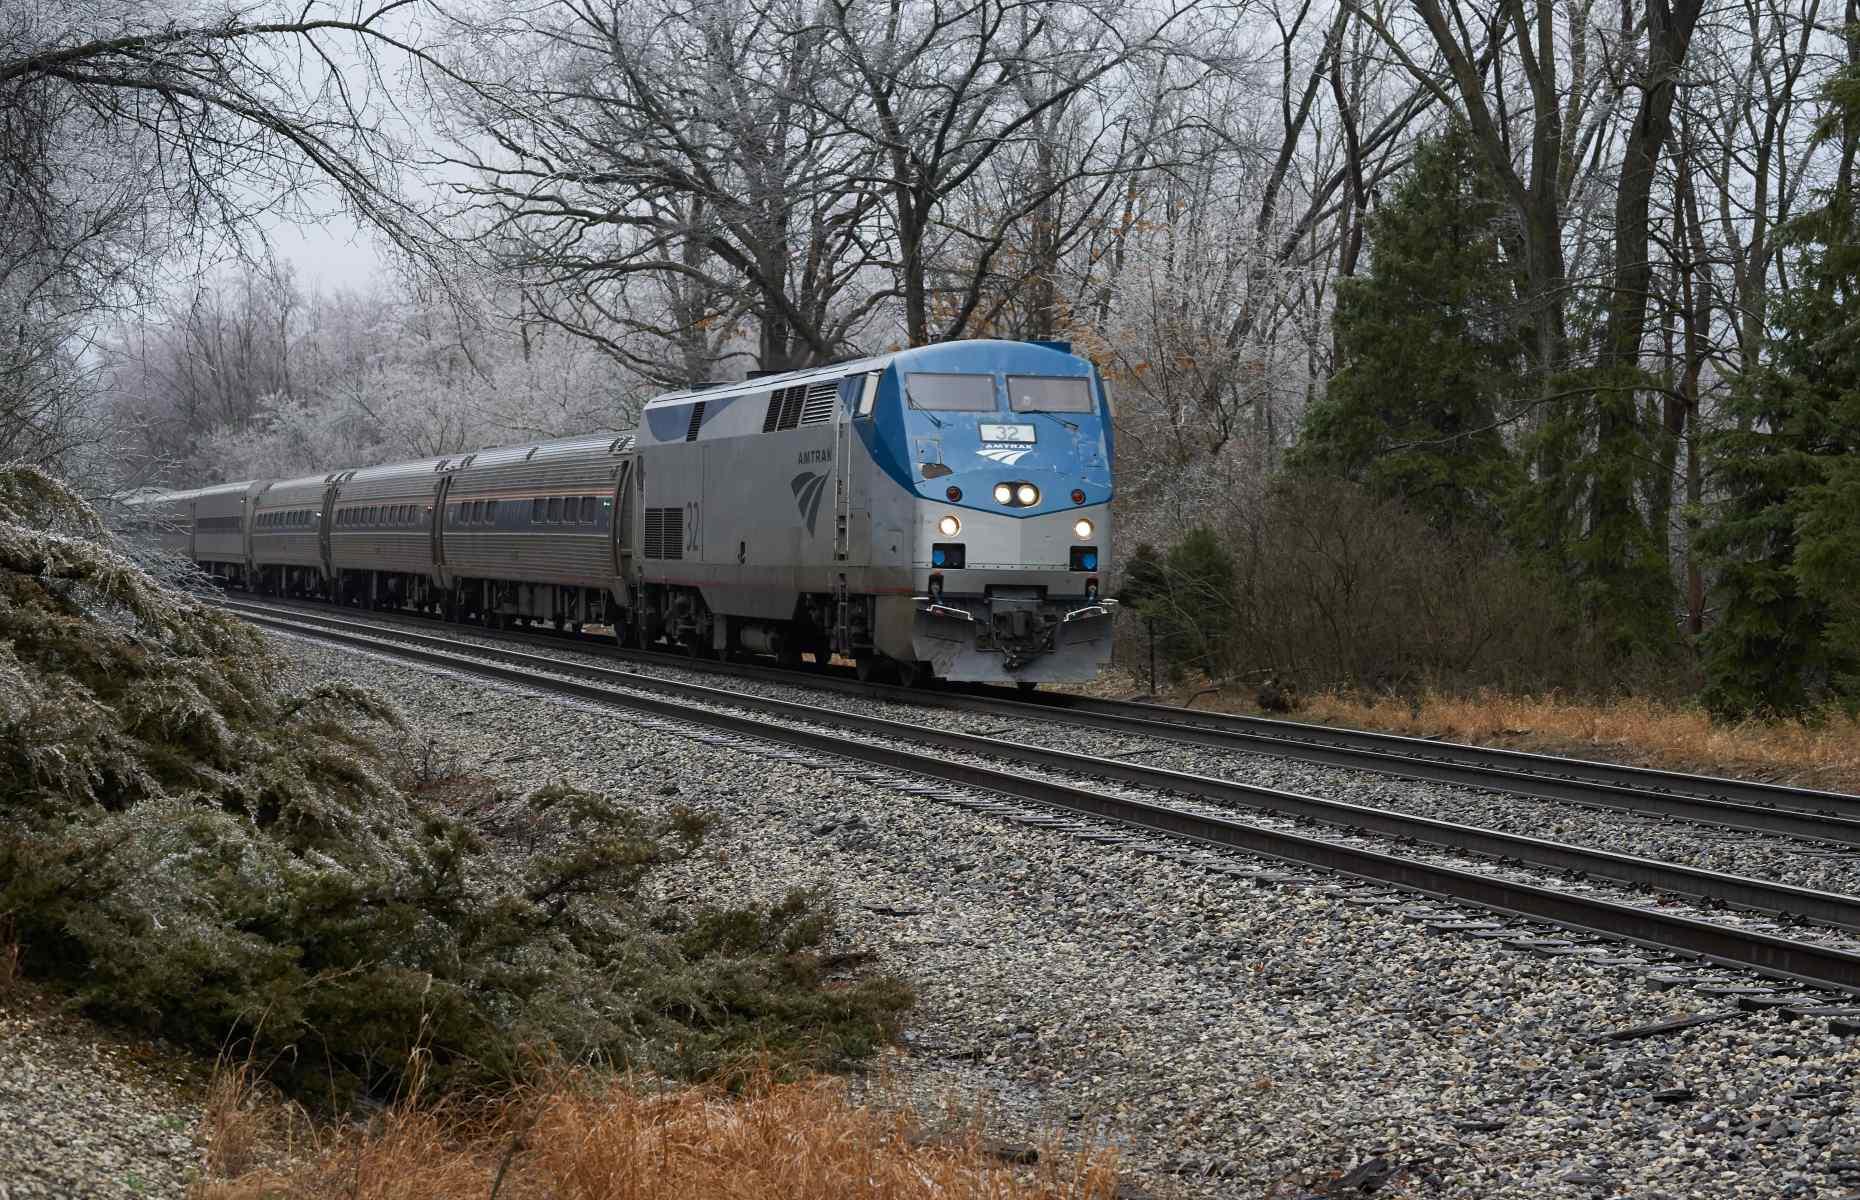 <p>Amtrak's Blue Water service laces together several Michigan stops between Port Huron and Chicago. It bends around the southern shore of Lake Michigan before heading into the Great Lake State's interior, terminating on Lake Huron's shores.</p>  <p>The westbound Blue Water service makes for a pleasant morning on the tracks, while the eastbound train leaves Chicago in the late afternoon, promising some serious sunset action if you travel when the evenings are longer.</p>